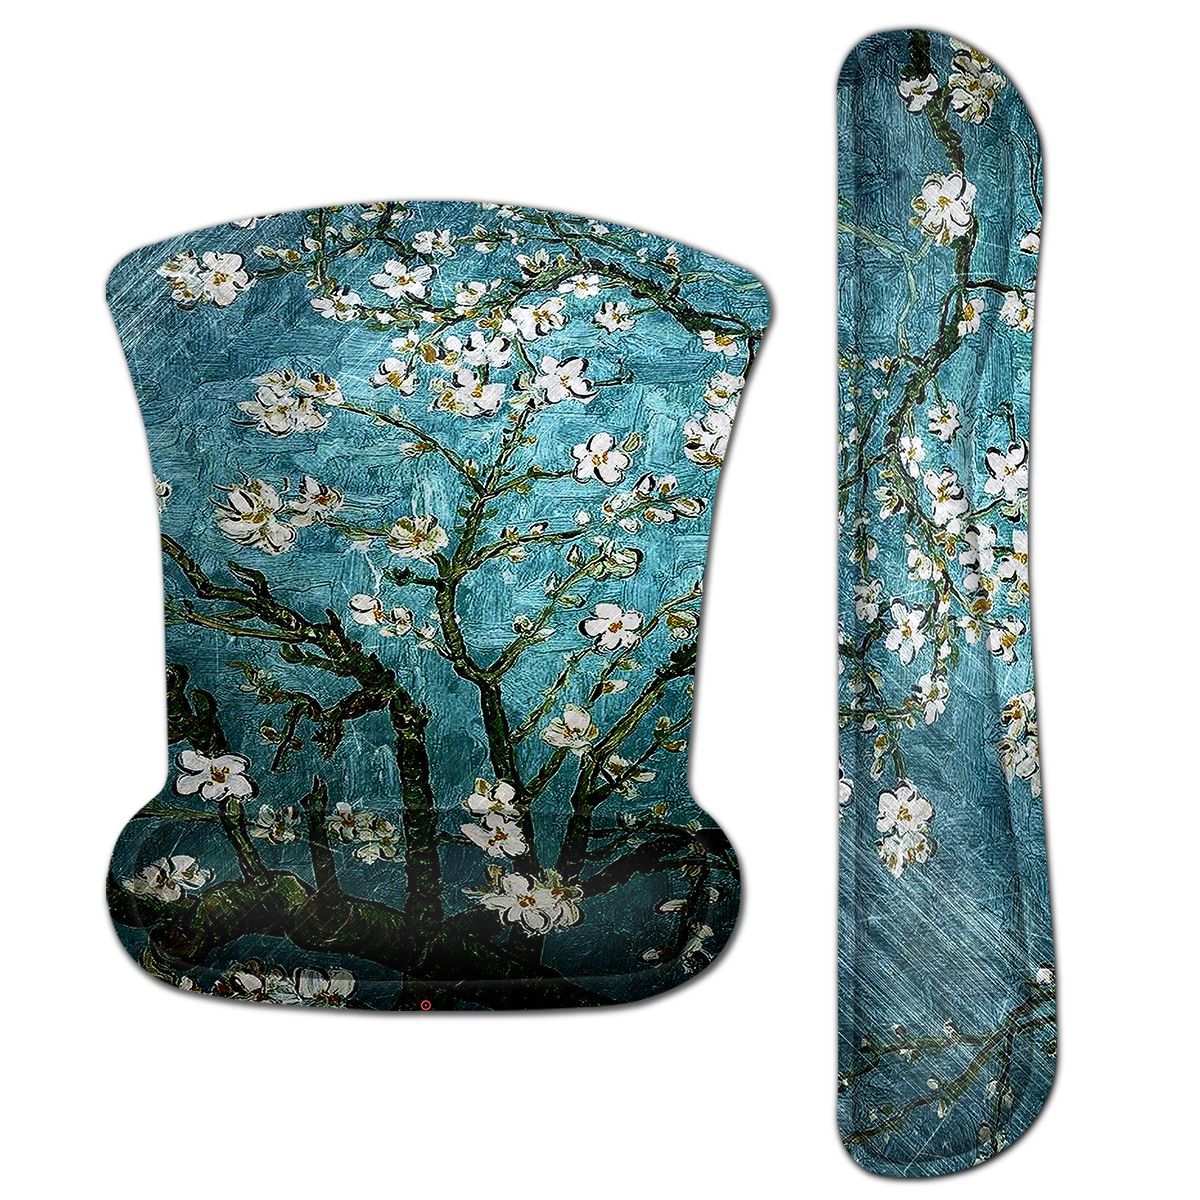 Almond Blossom Art Mouse Pad with Wrist Rest Keyboard Support